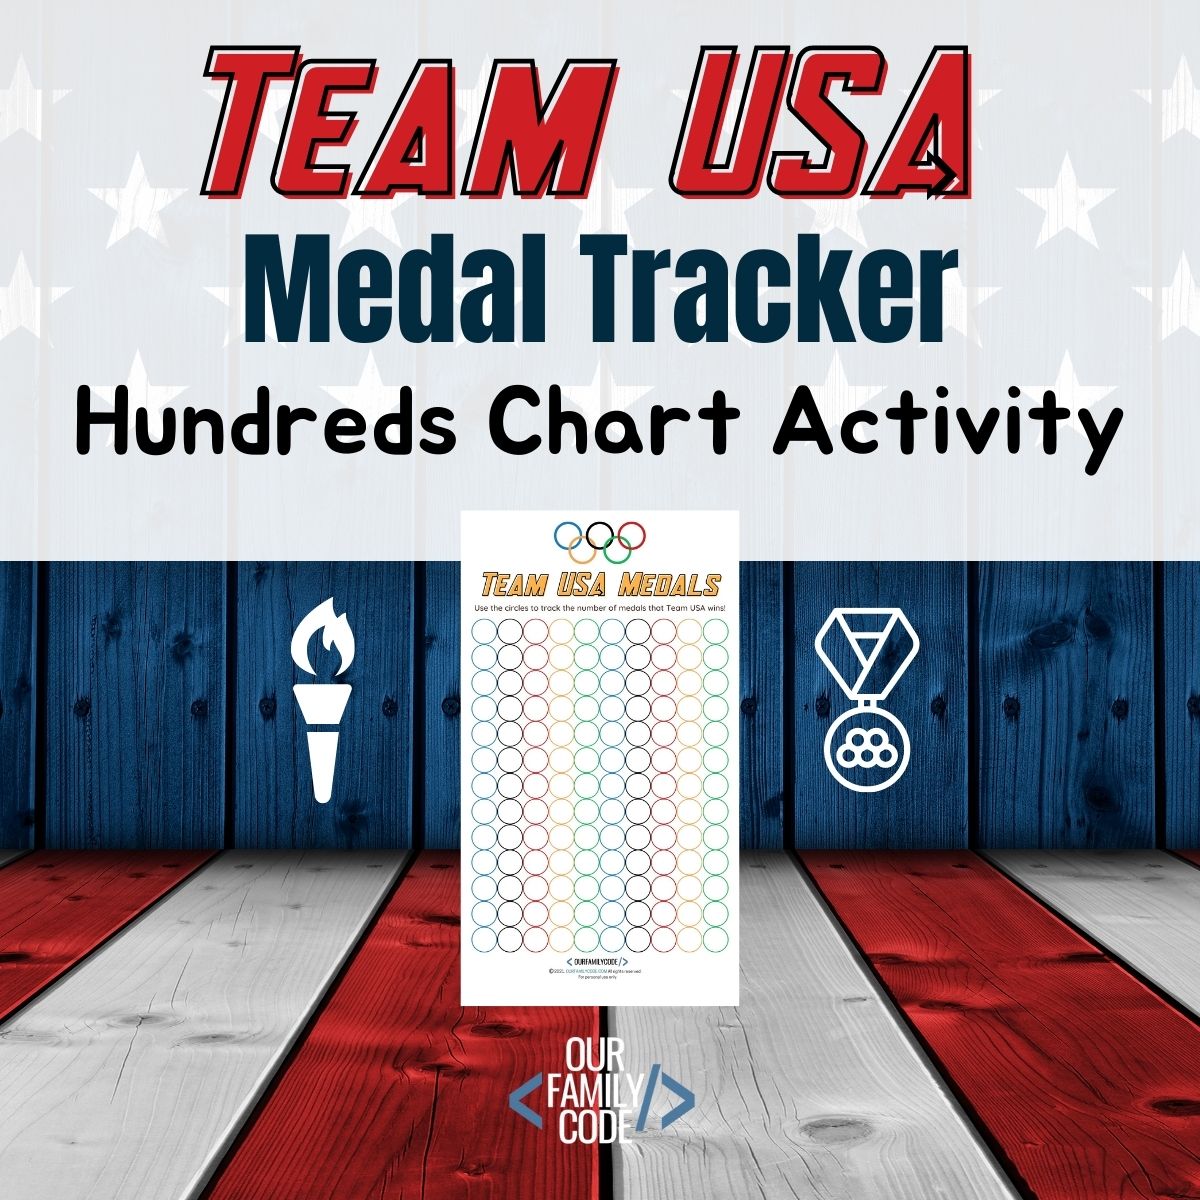 A picture of a Team USA medal tracking hundreds chart activity on a red, white, and blue background.